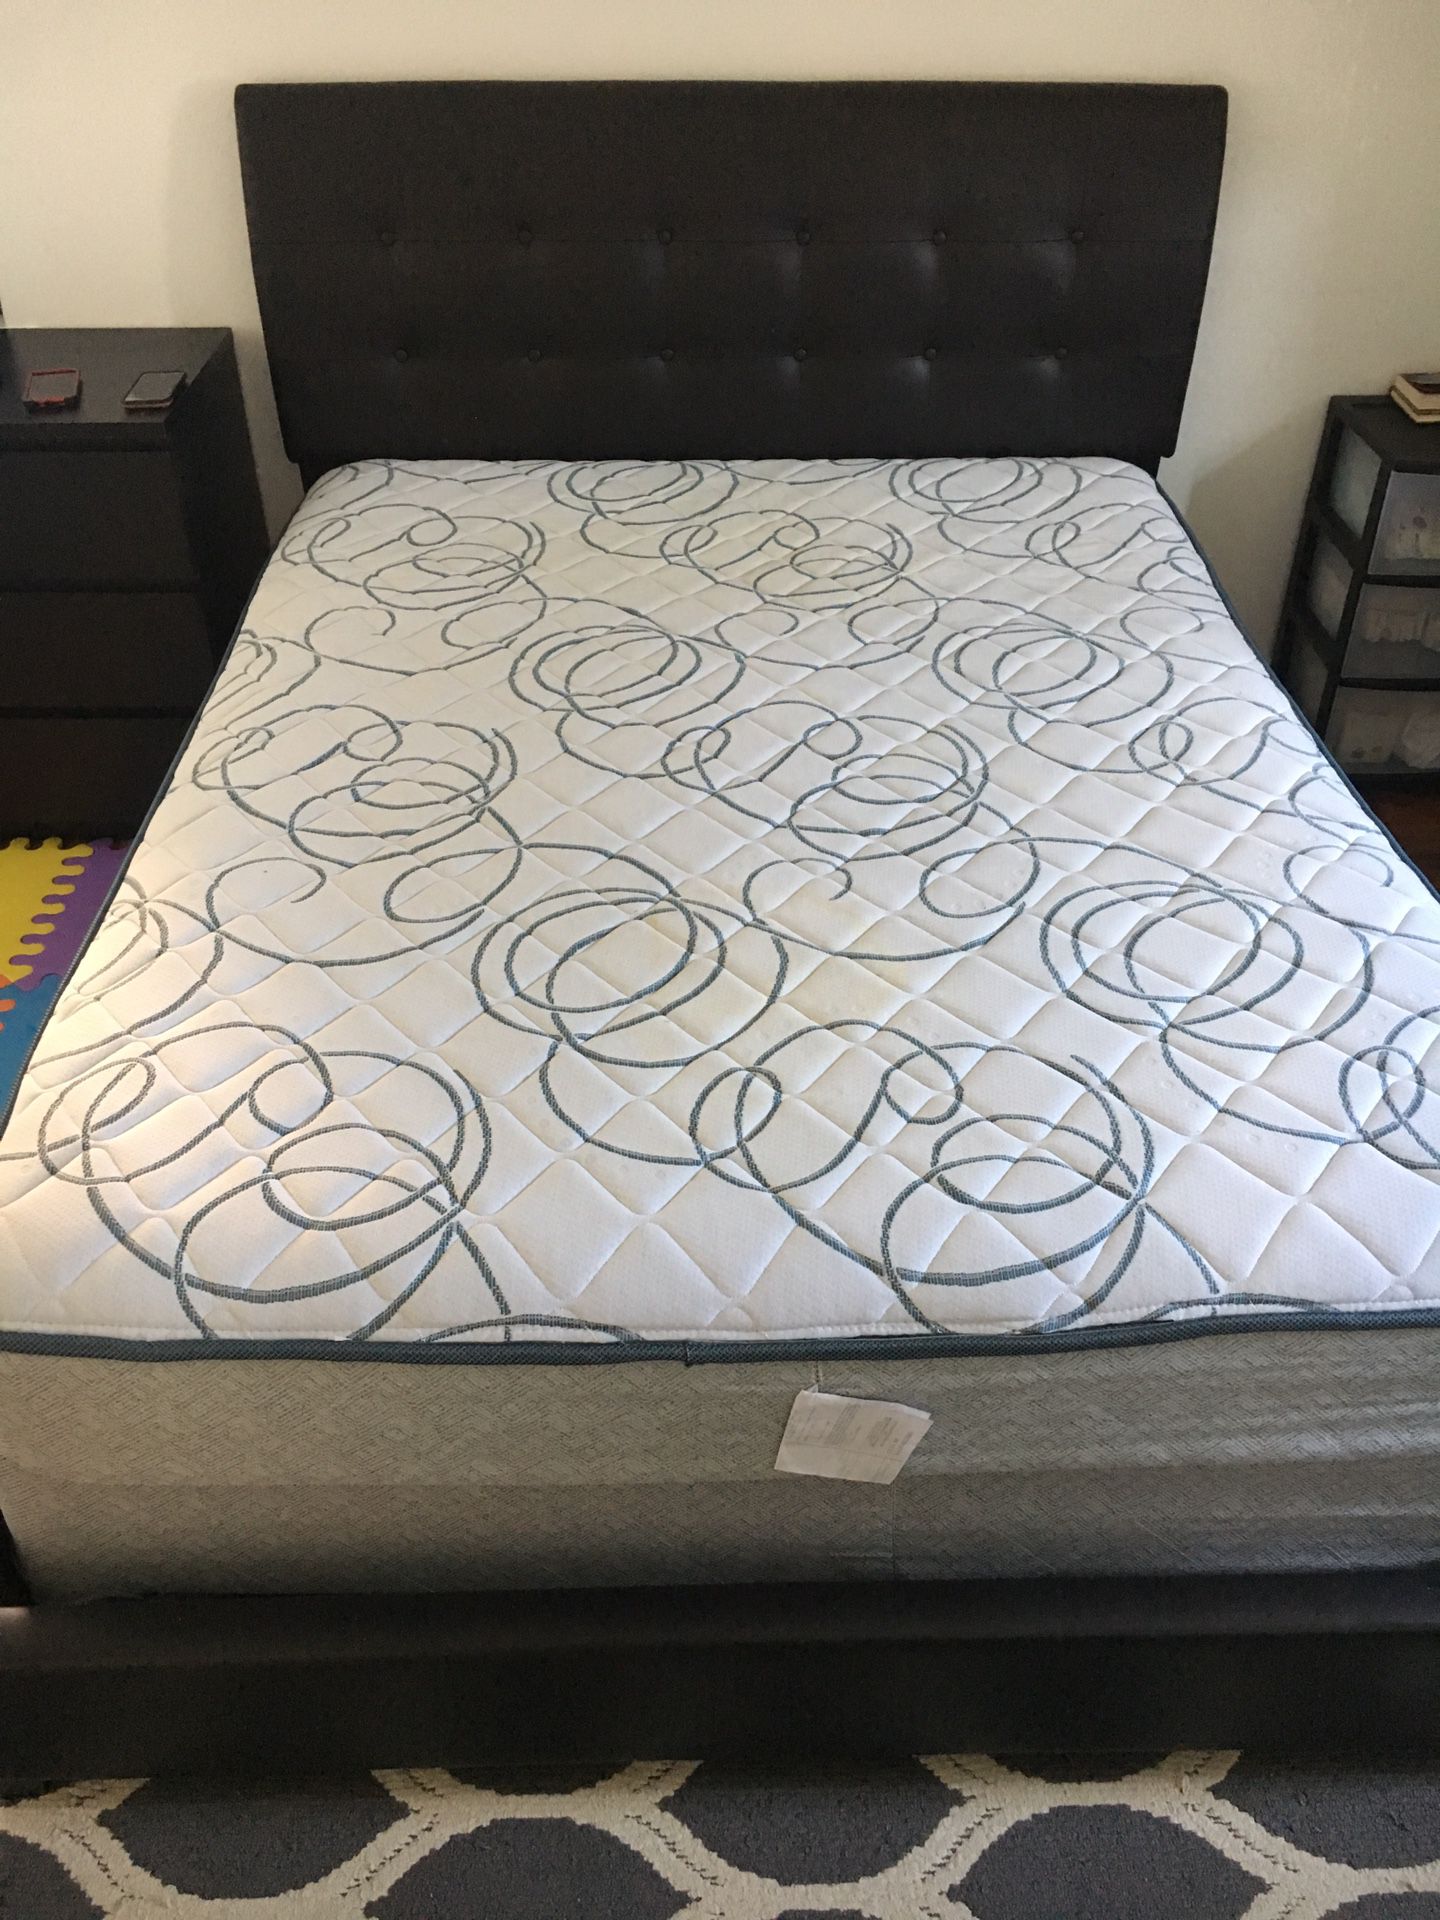 Queen bed and frame